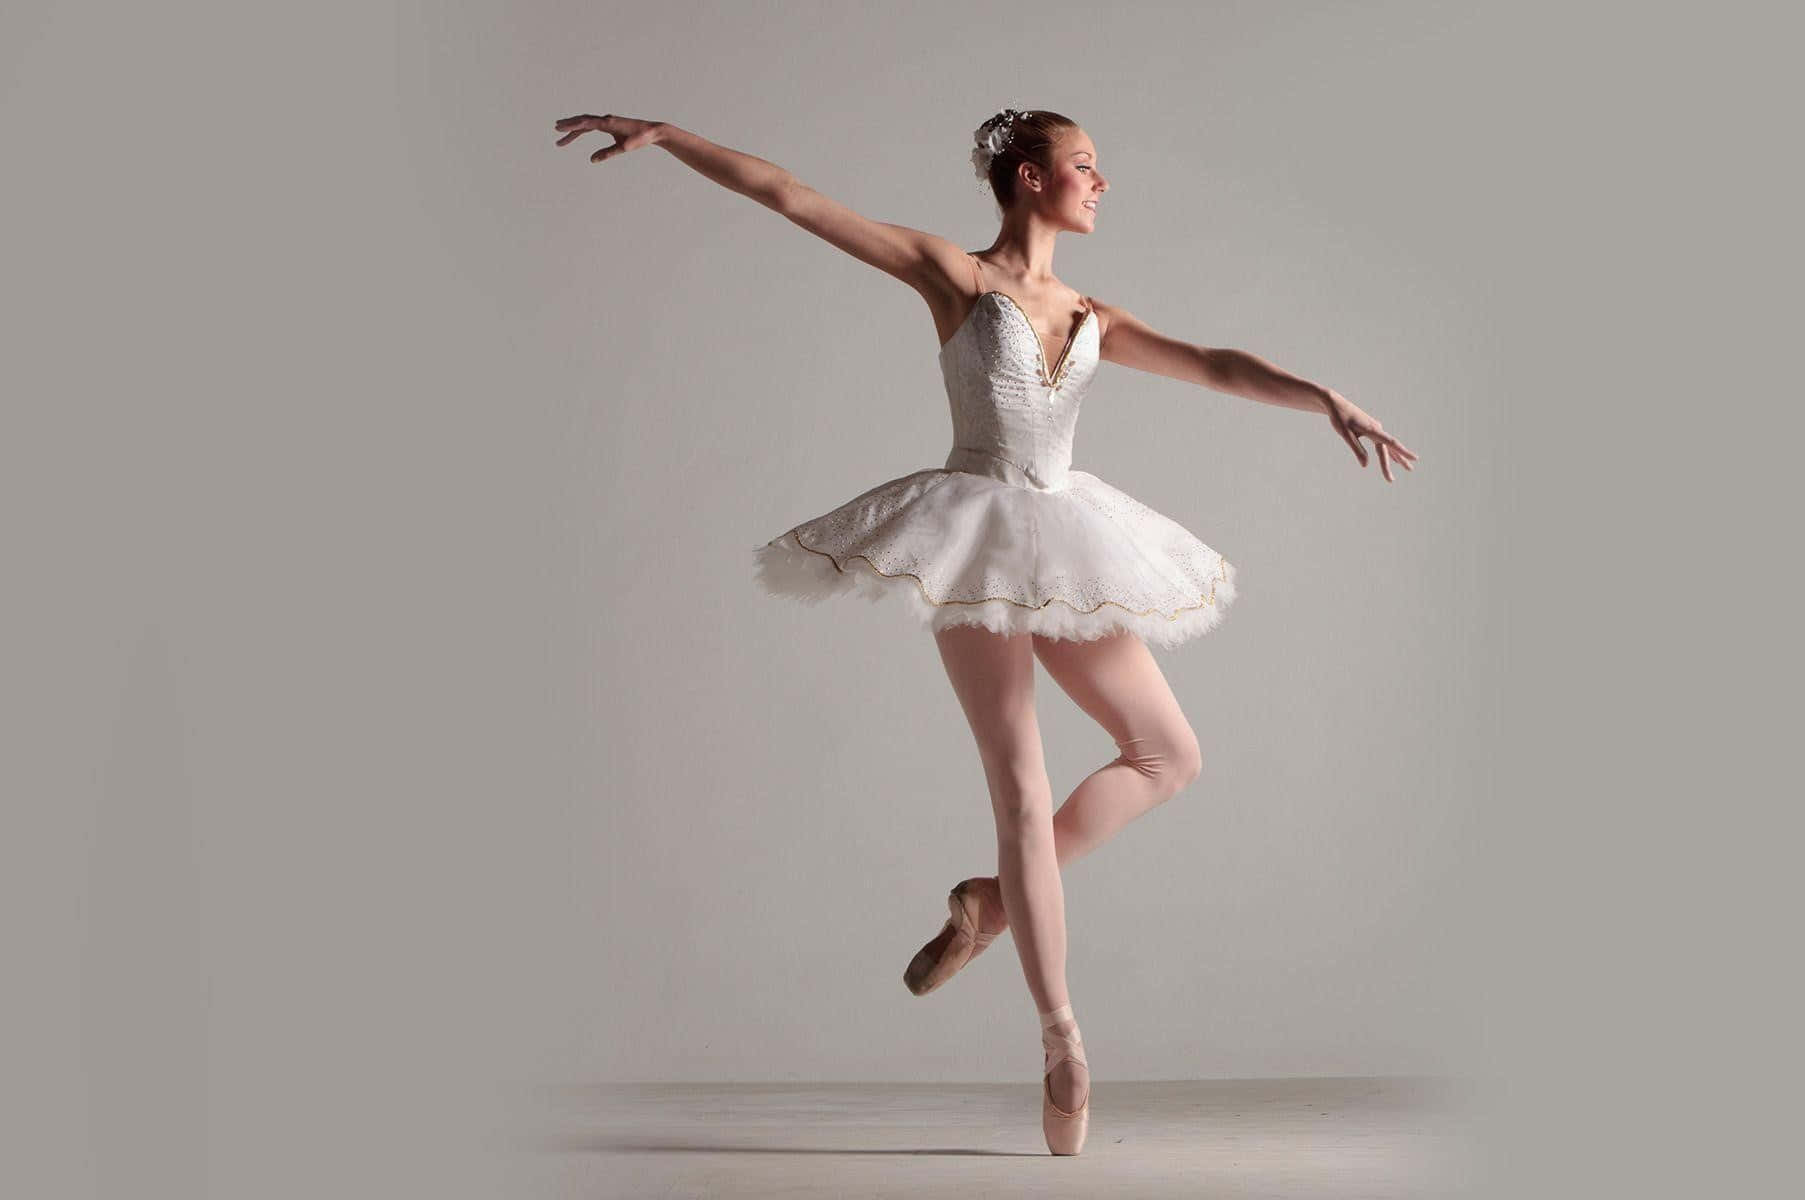 A Young Woman In White Ballet Dress Is Posing